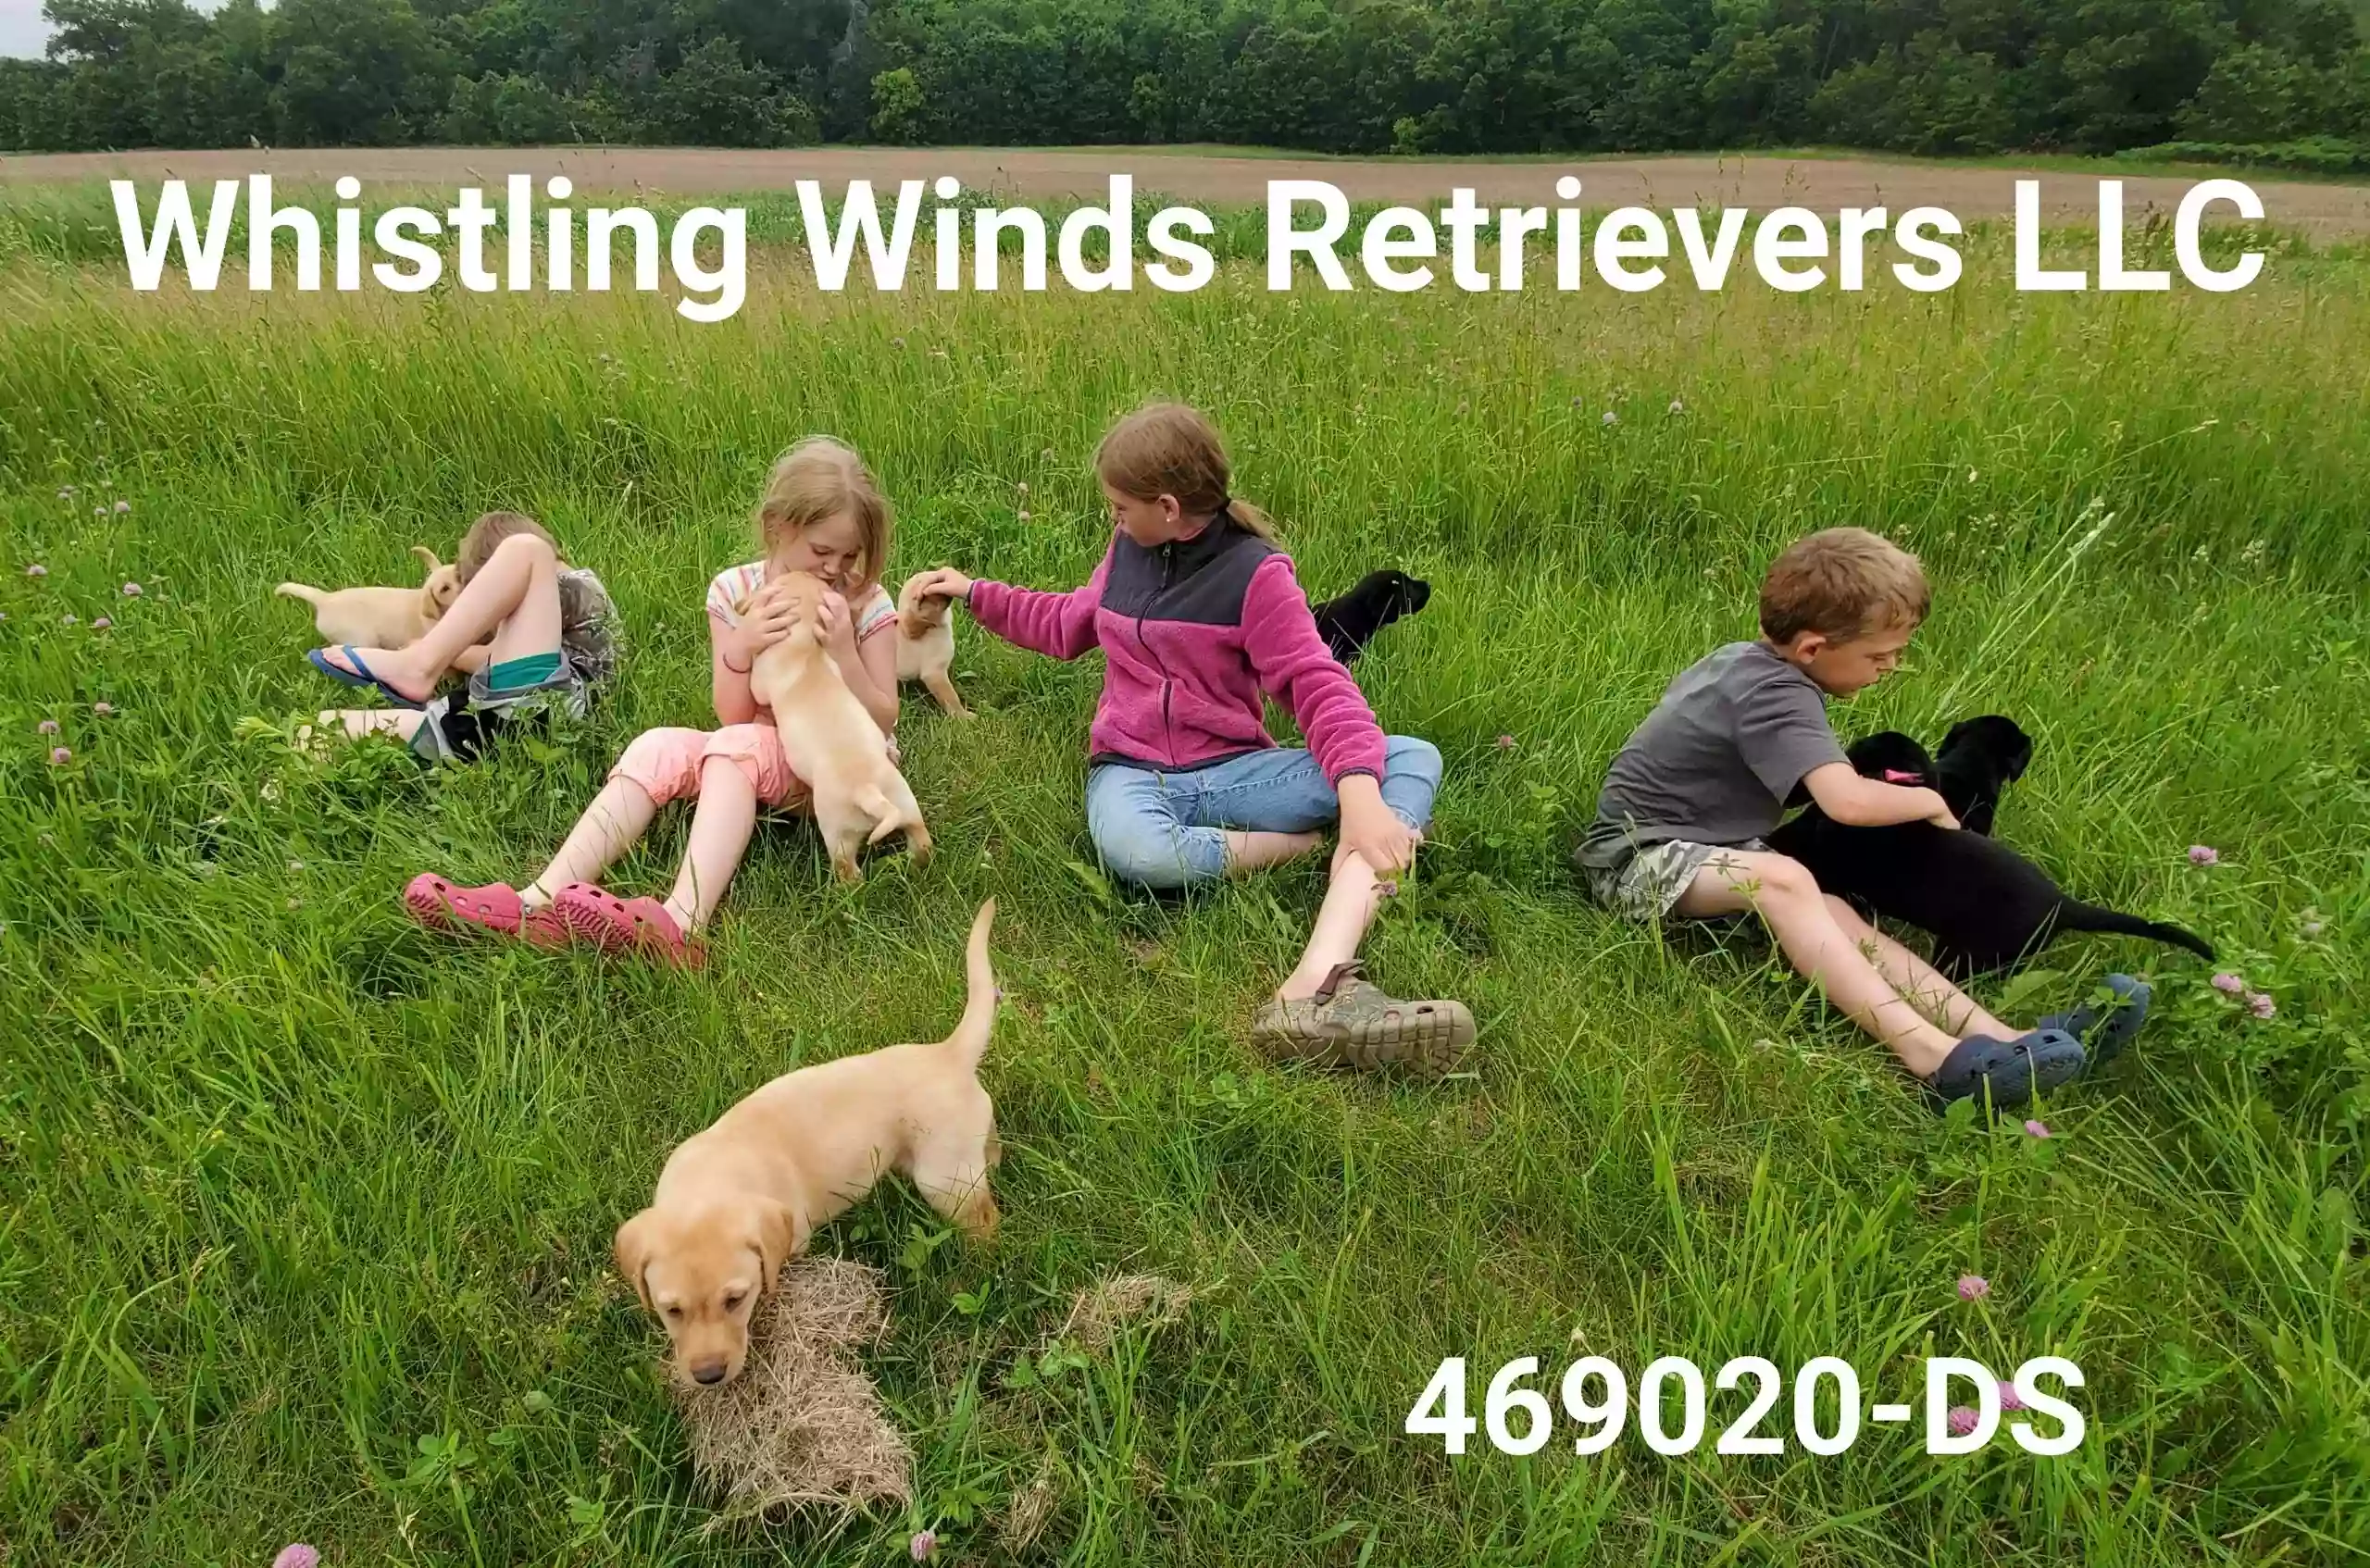 Whistling Winds Retrievers